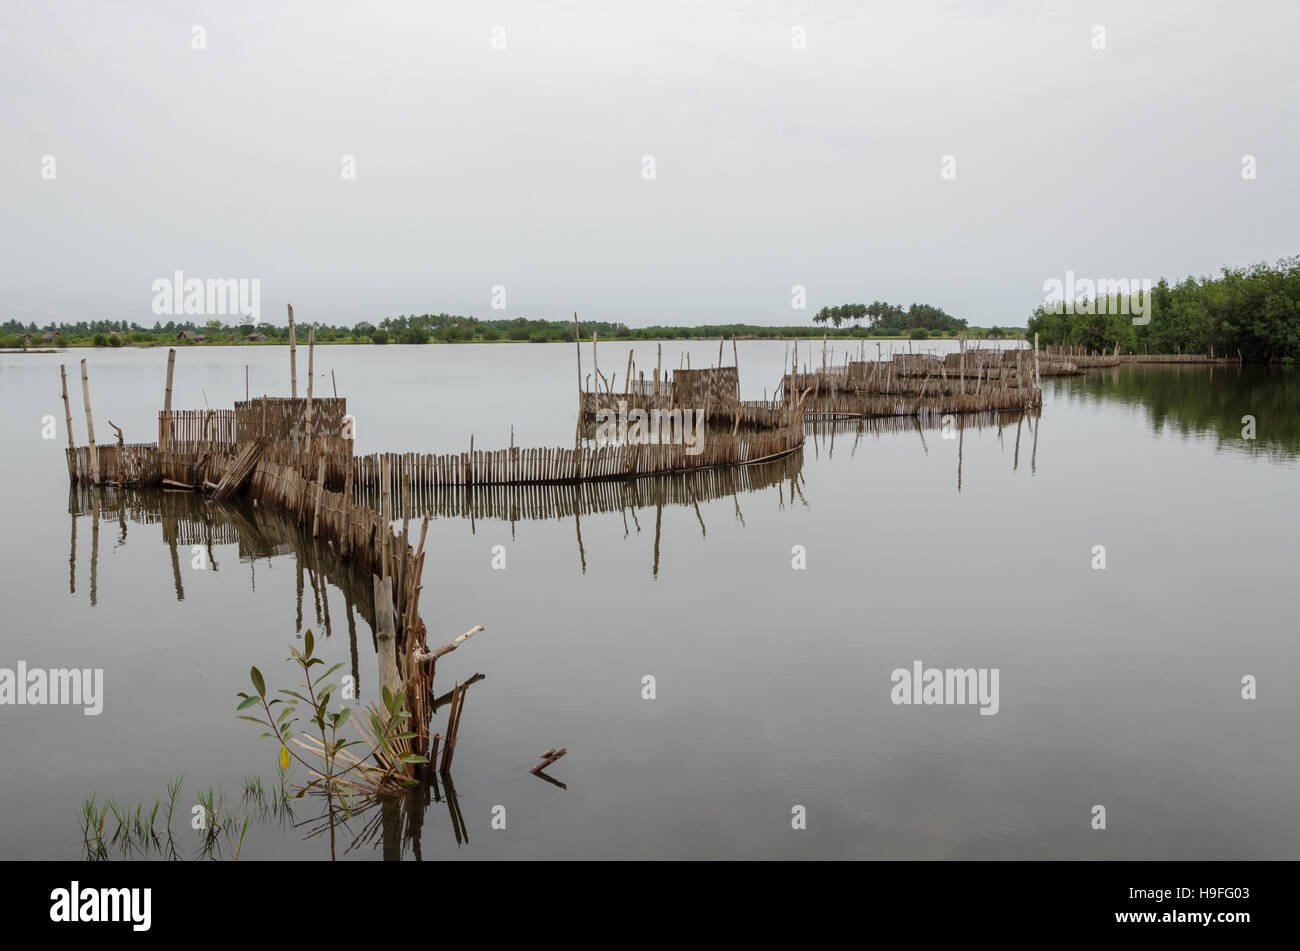 Traditional reed fishing traps used in wetlands near the coast in